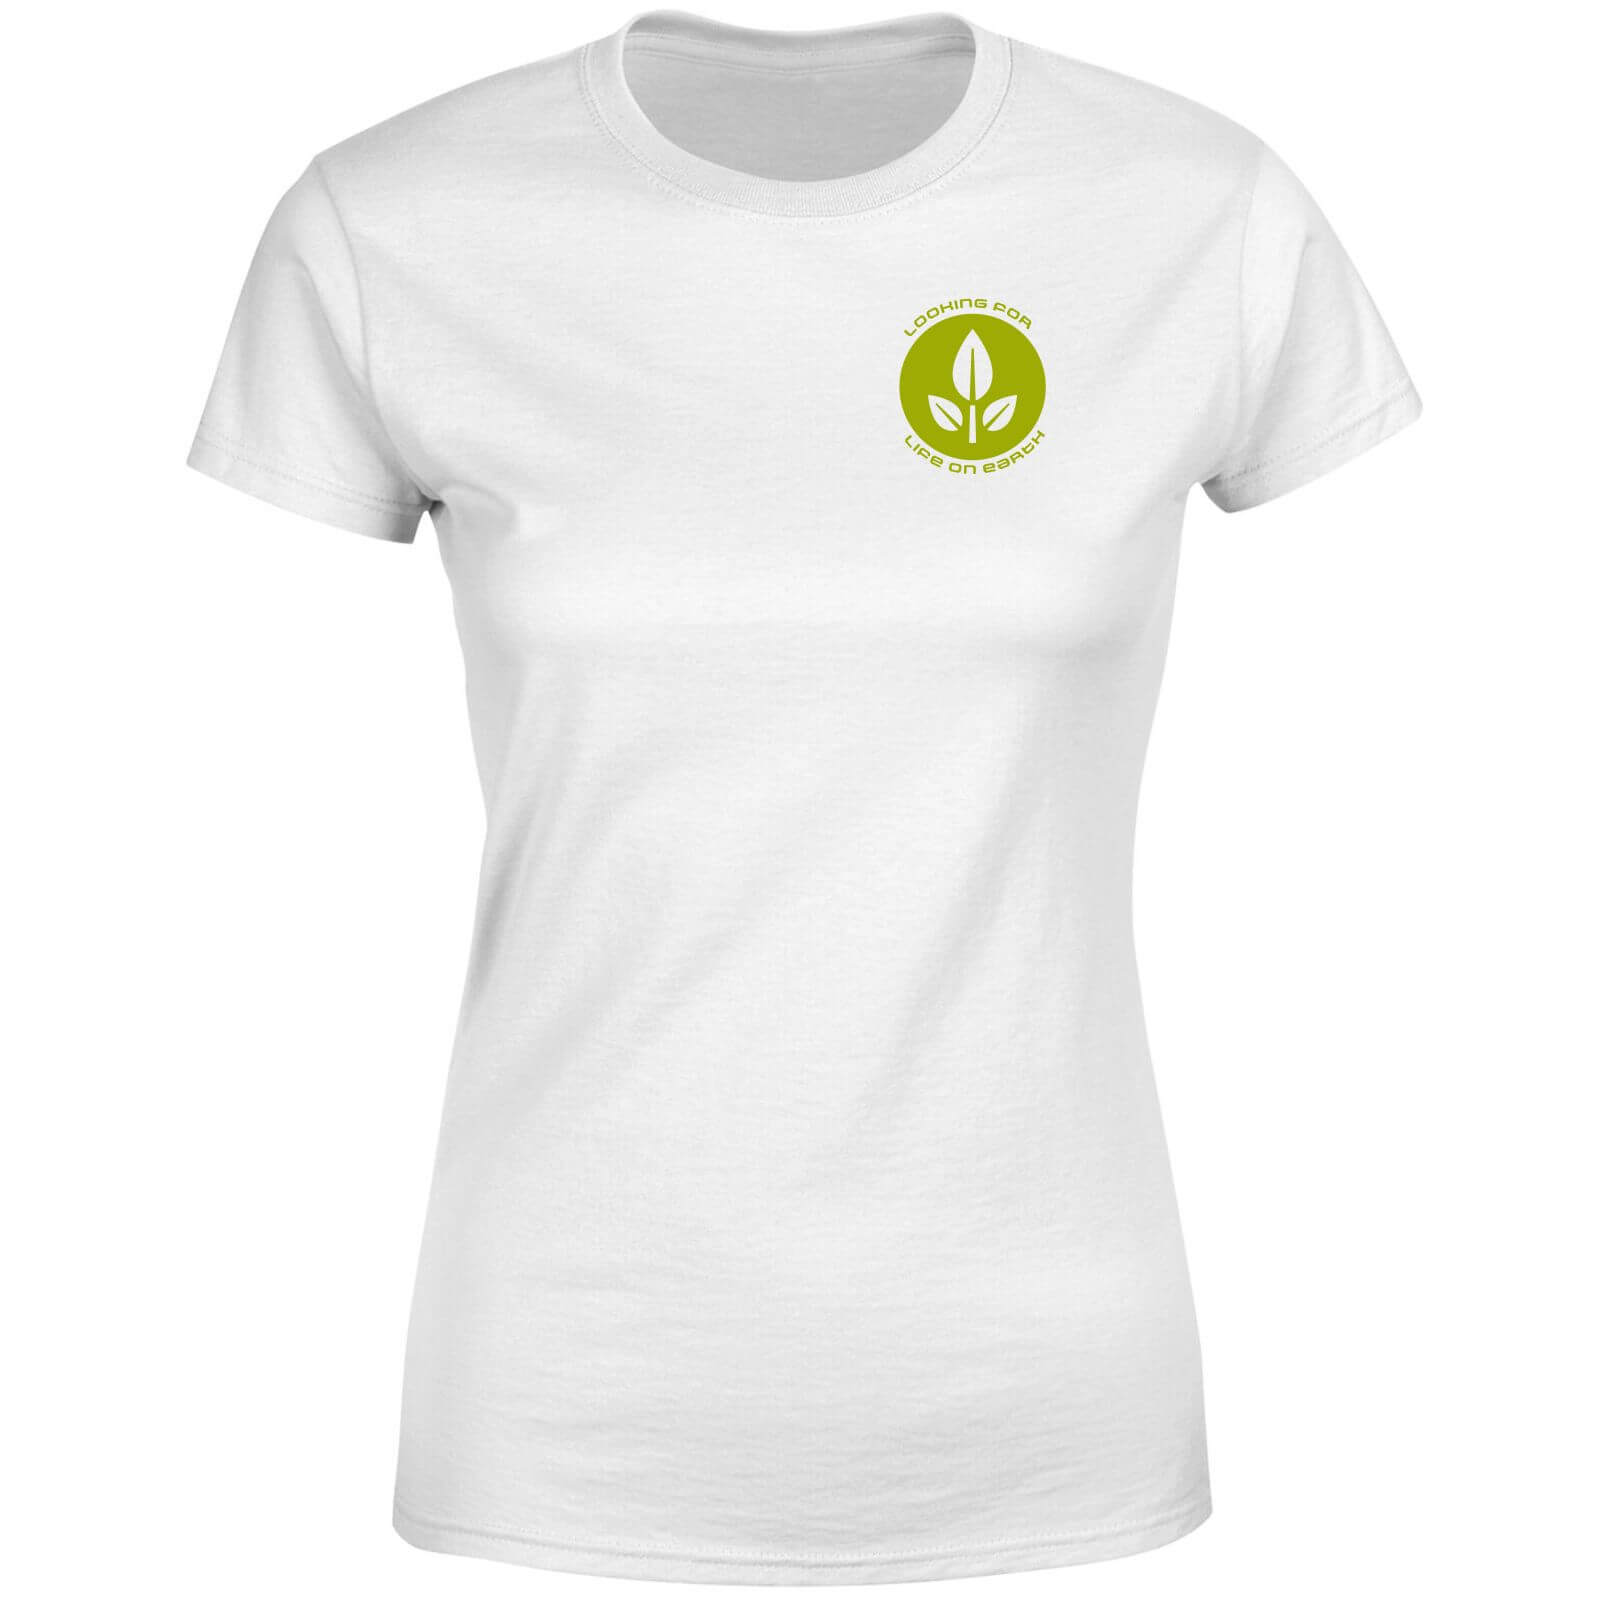 Wall-E Looking For Life On Earth Women's T-Shirt - White - L